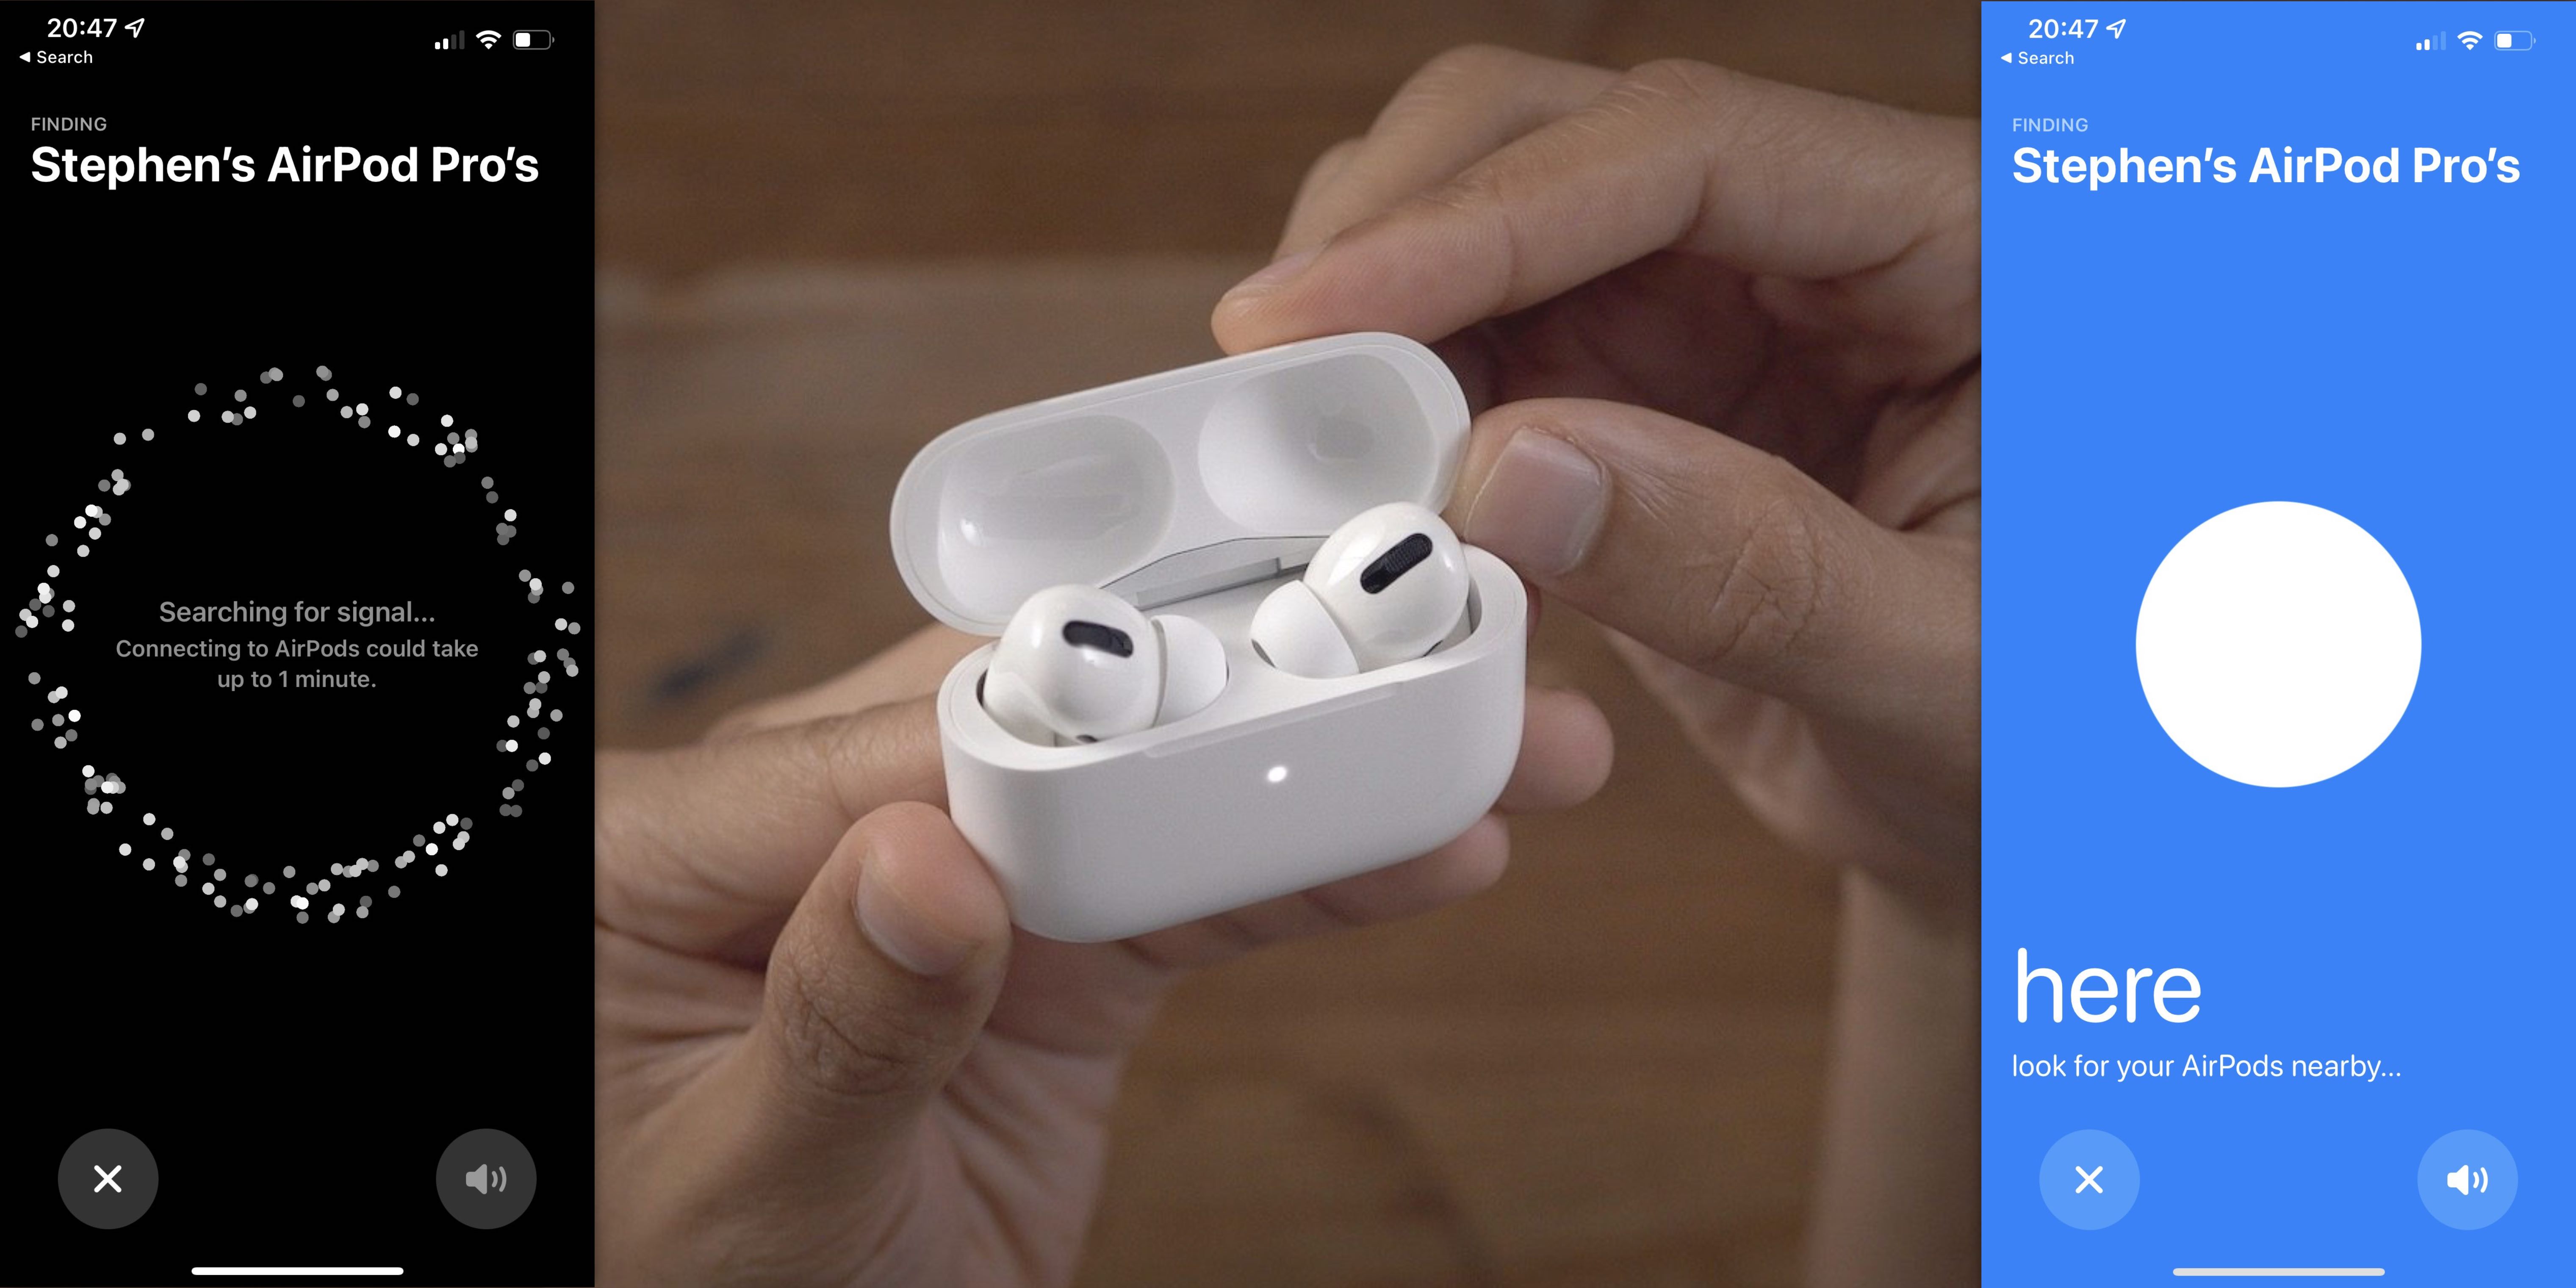 Apple rolling out new features for AirPods Pro AirPods Max - 9to5Mac